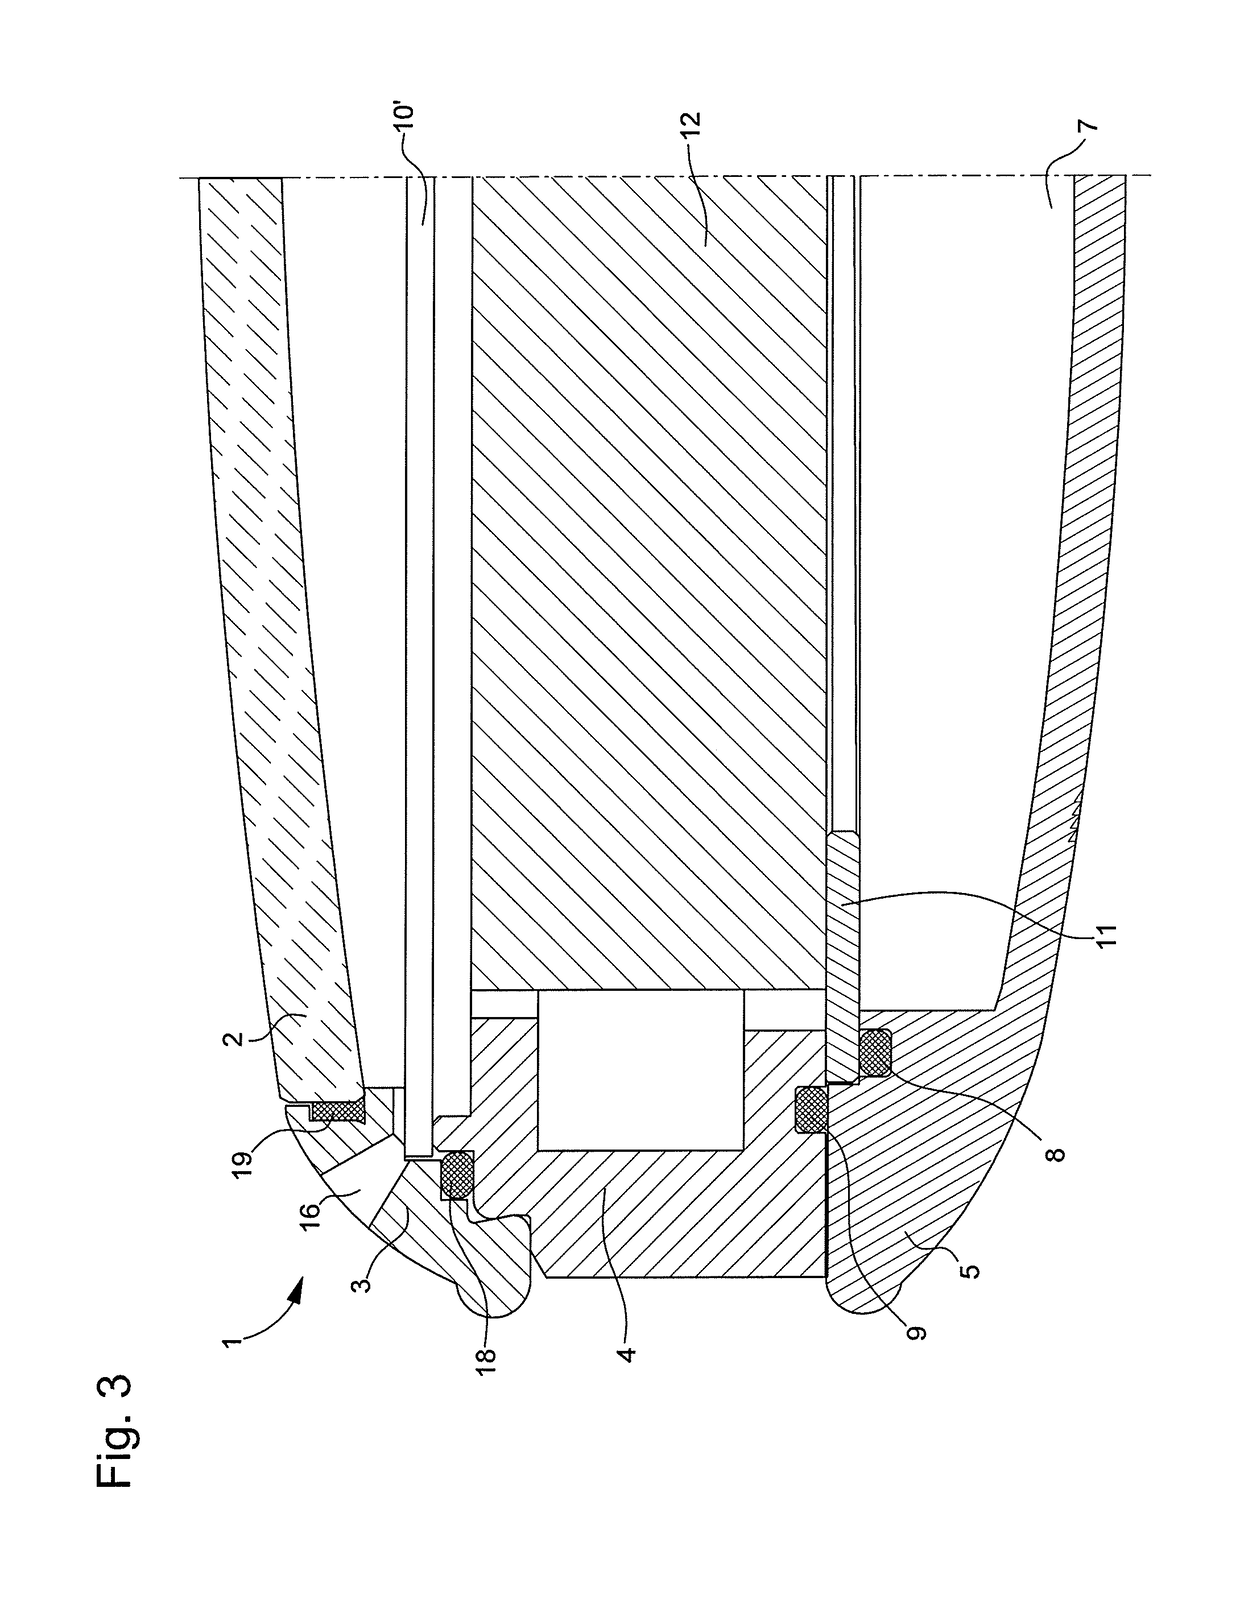 Acoustic radiation membrane, and striking watch equipped with the acoustic membrane